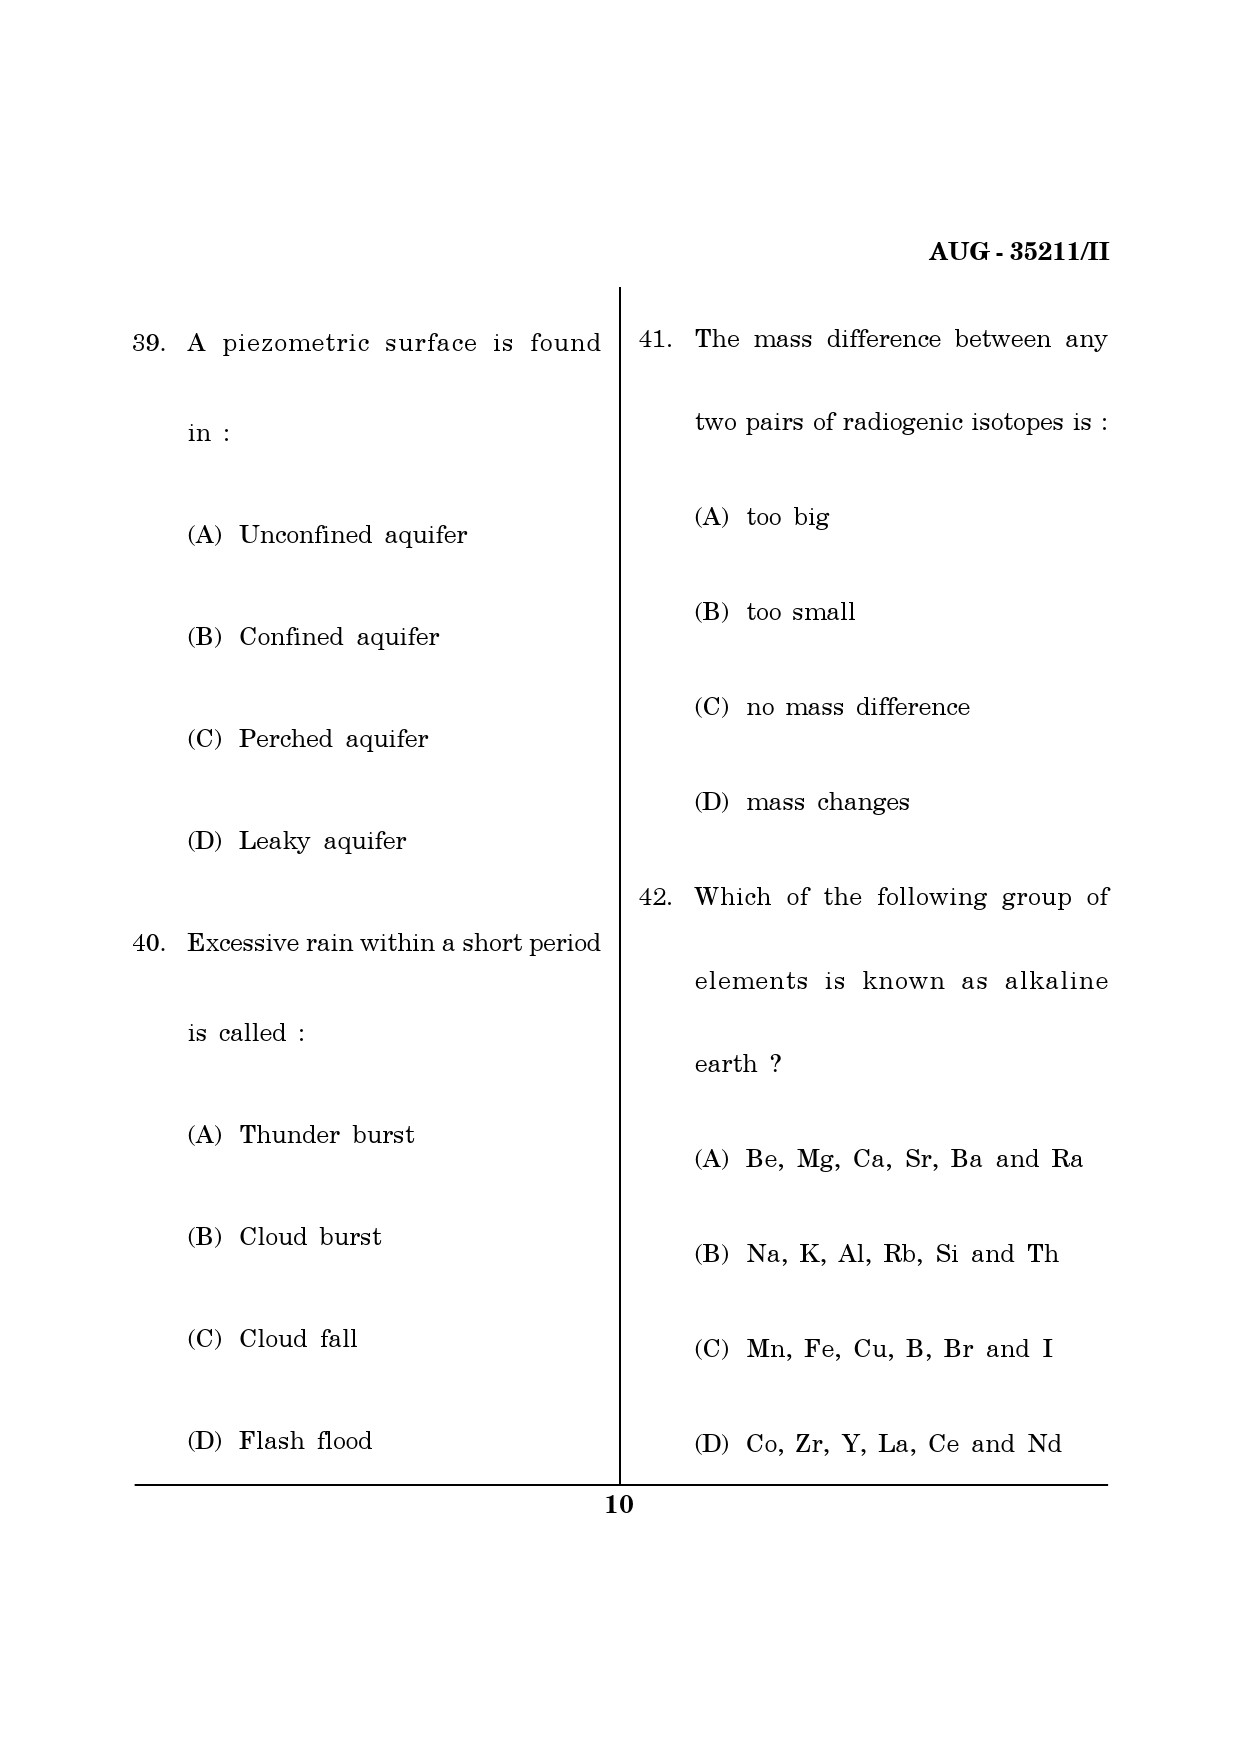 Maharashtra SET Earth Atmospheric Ocean Planetary Science Question Paper II August 2011 10